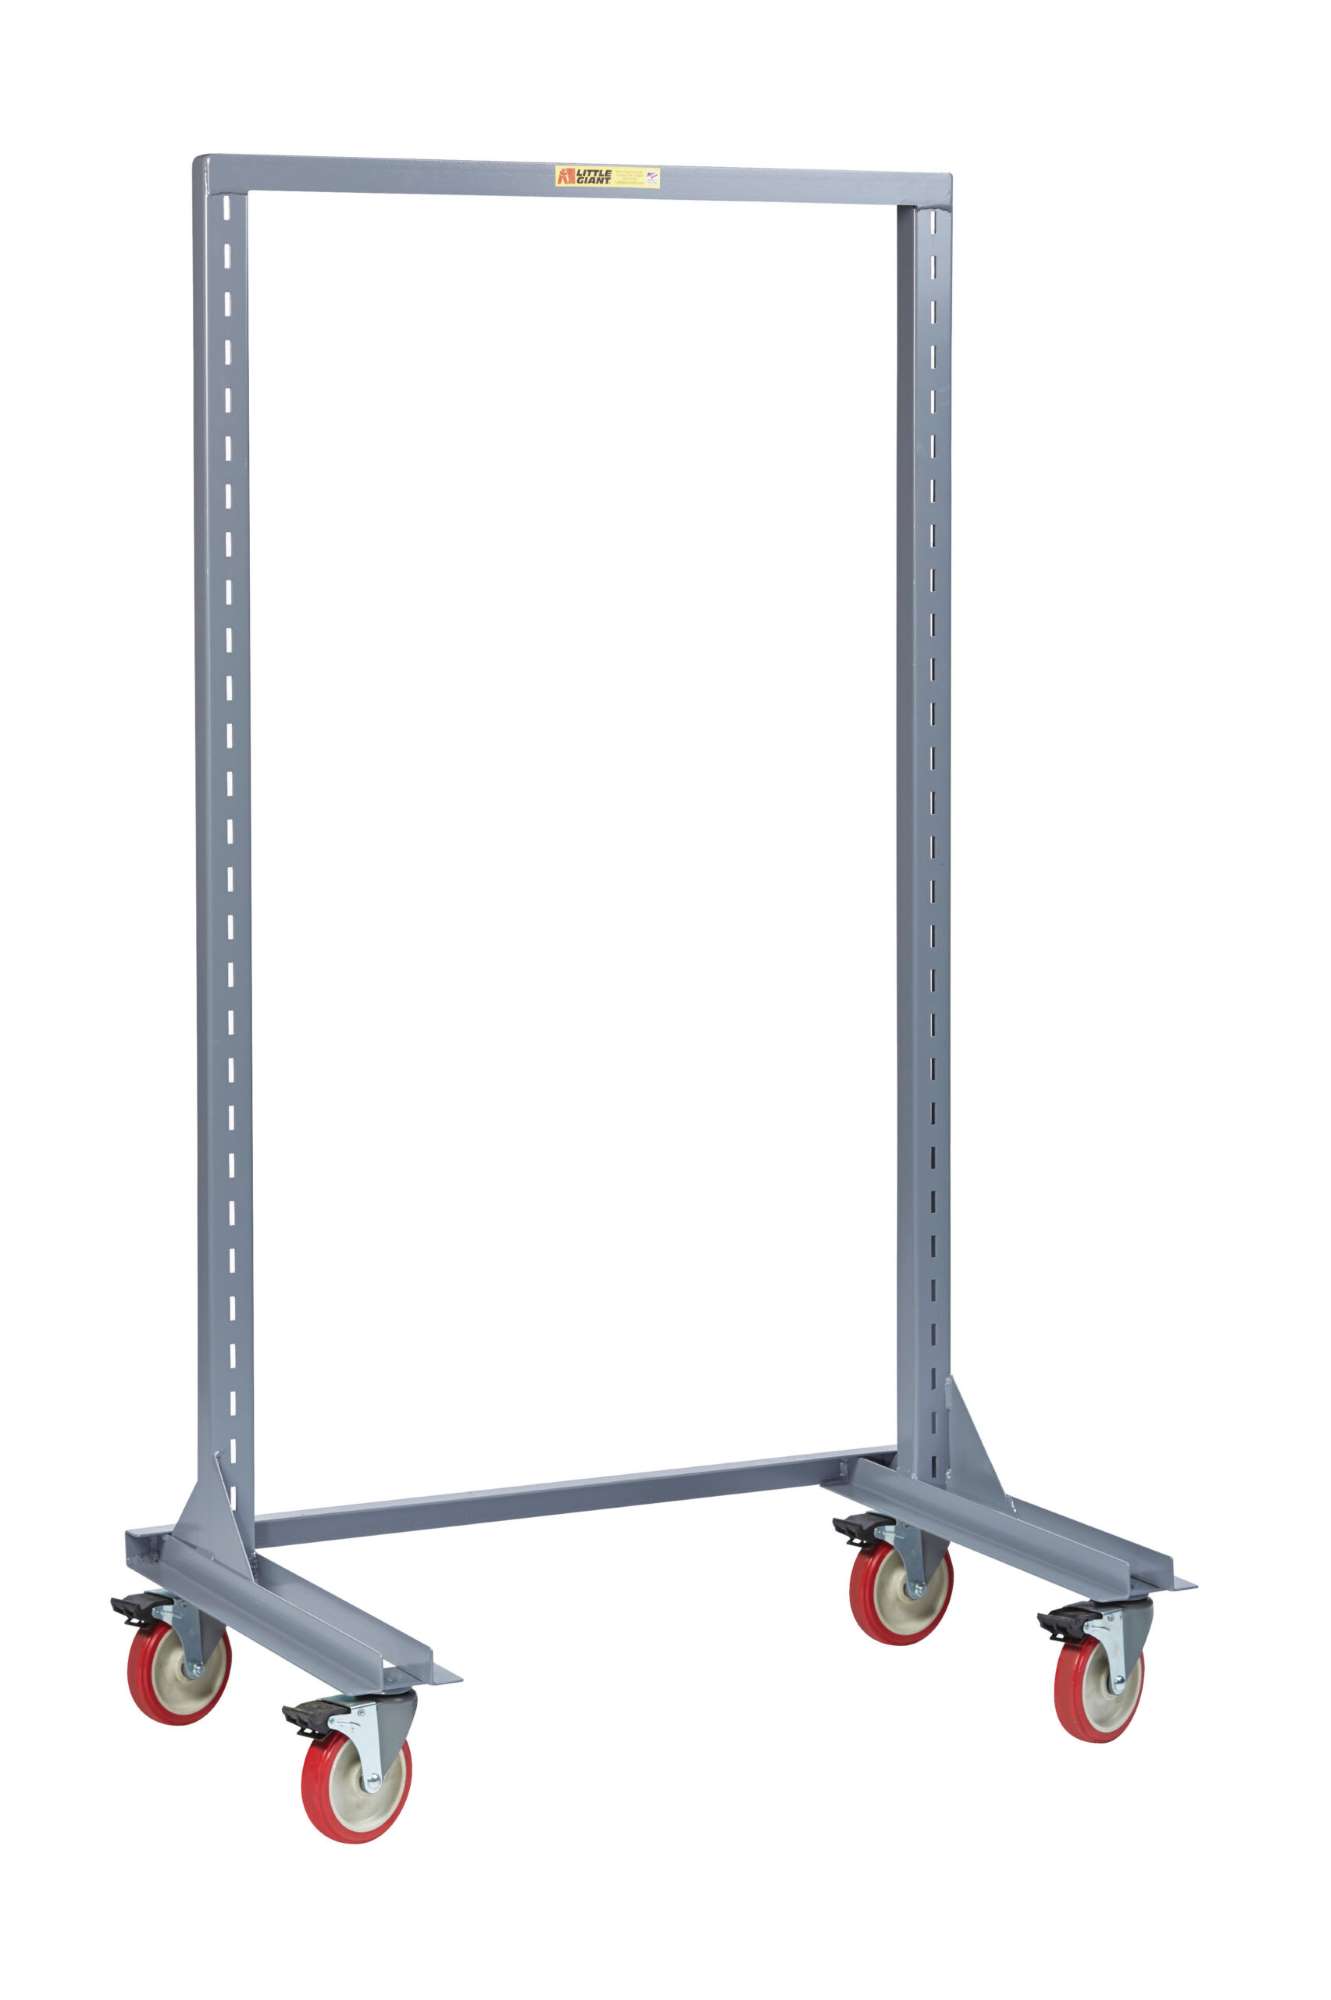 Little Giant heavy-duty mobile work center, 1200 lbs capacity, 60" uprights, Adjustable 2" spacing, Open base design